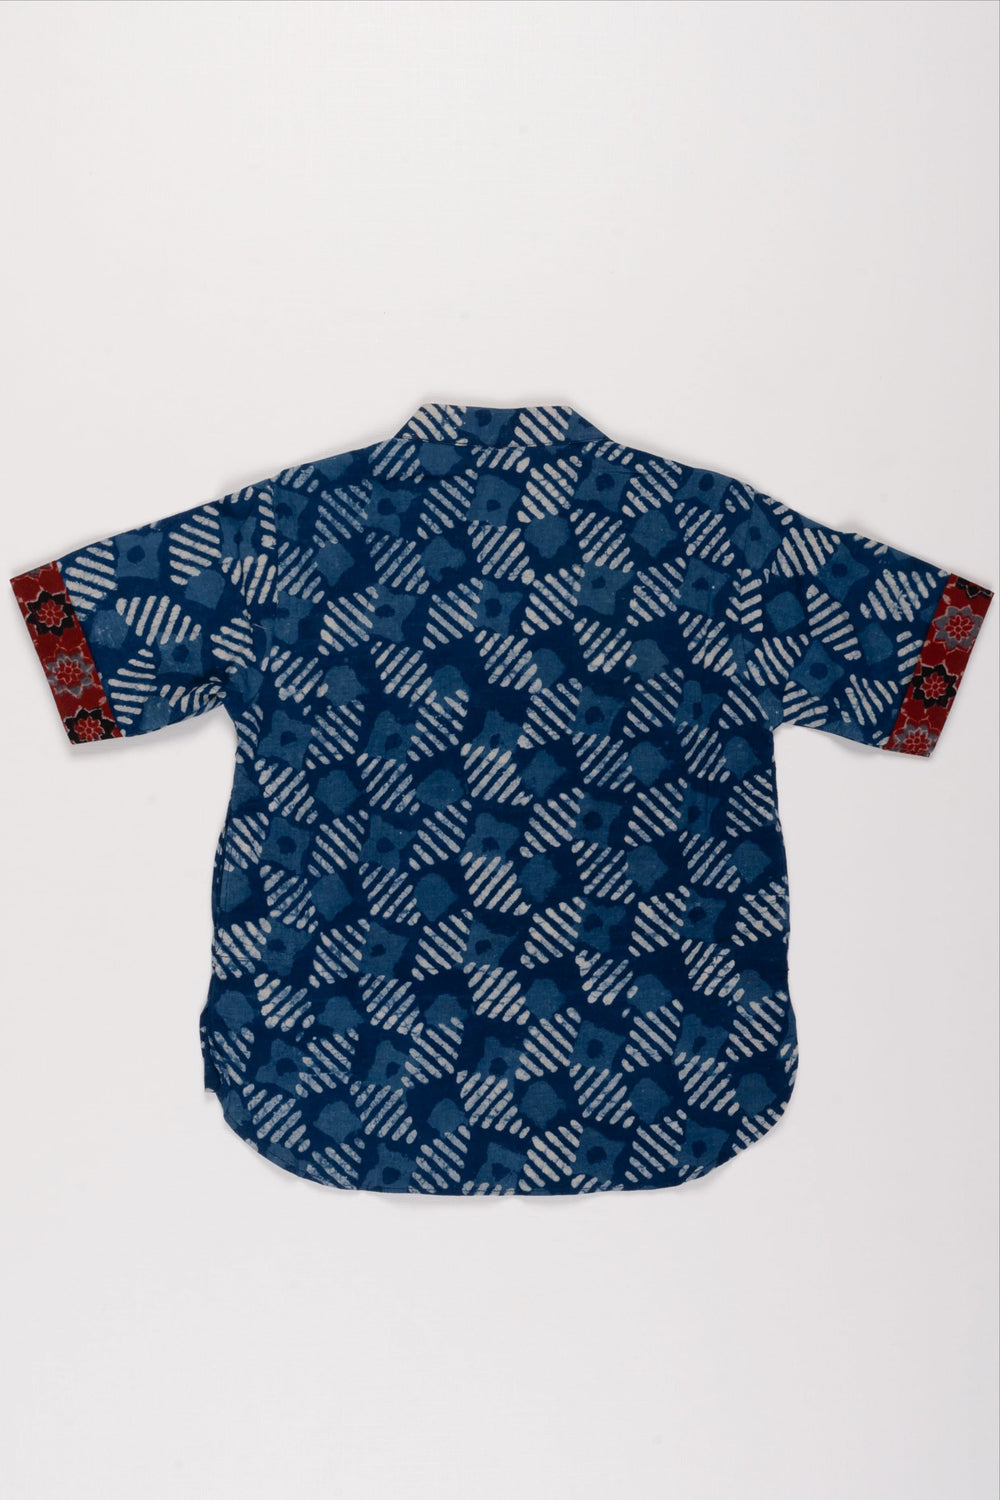 The Nesavu Boys Kurtha Shirt Boys Aesthetic Blue Cotton Shirt with Abstract Design and Unique Cuff Accents Nesavu Designer Boys Kurta Shirts Collection | Perfect for Festive Occasions | The Nesavu